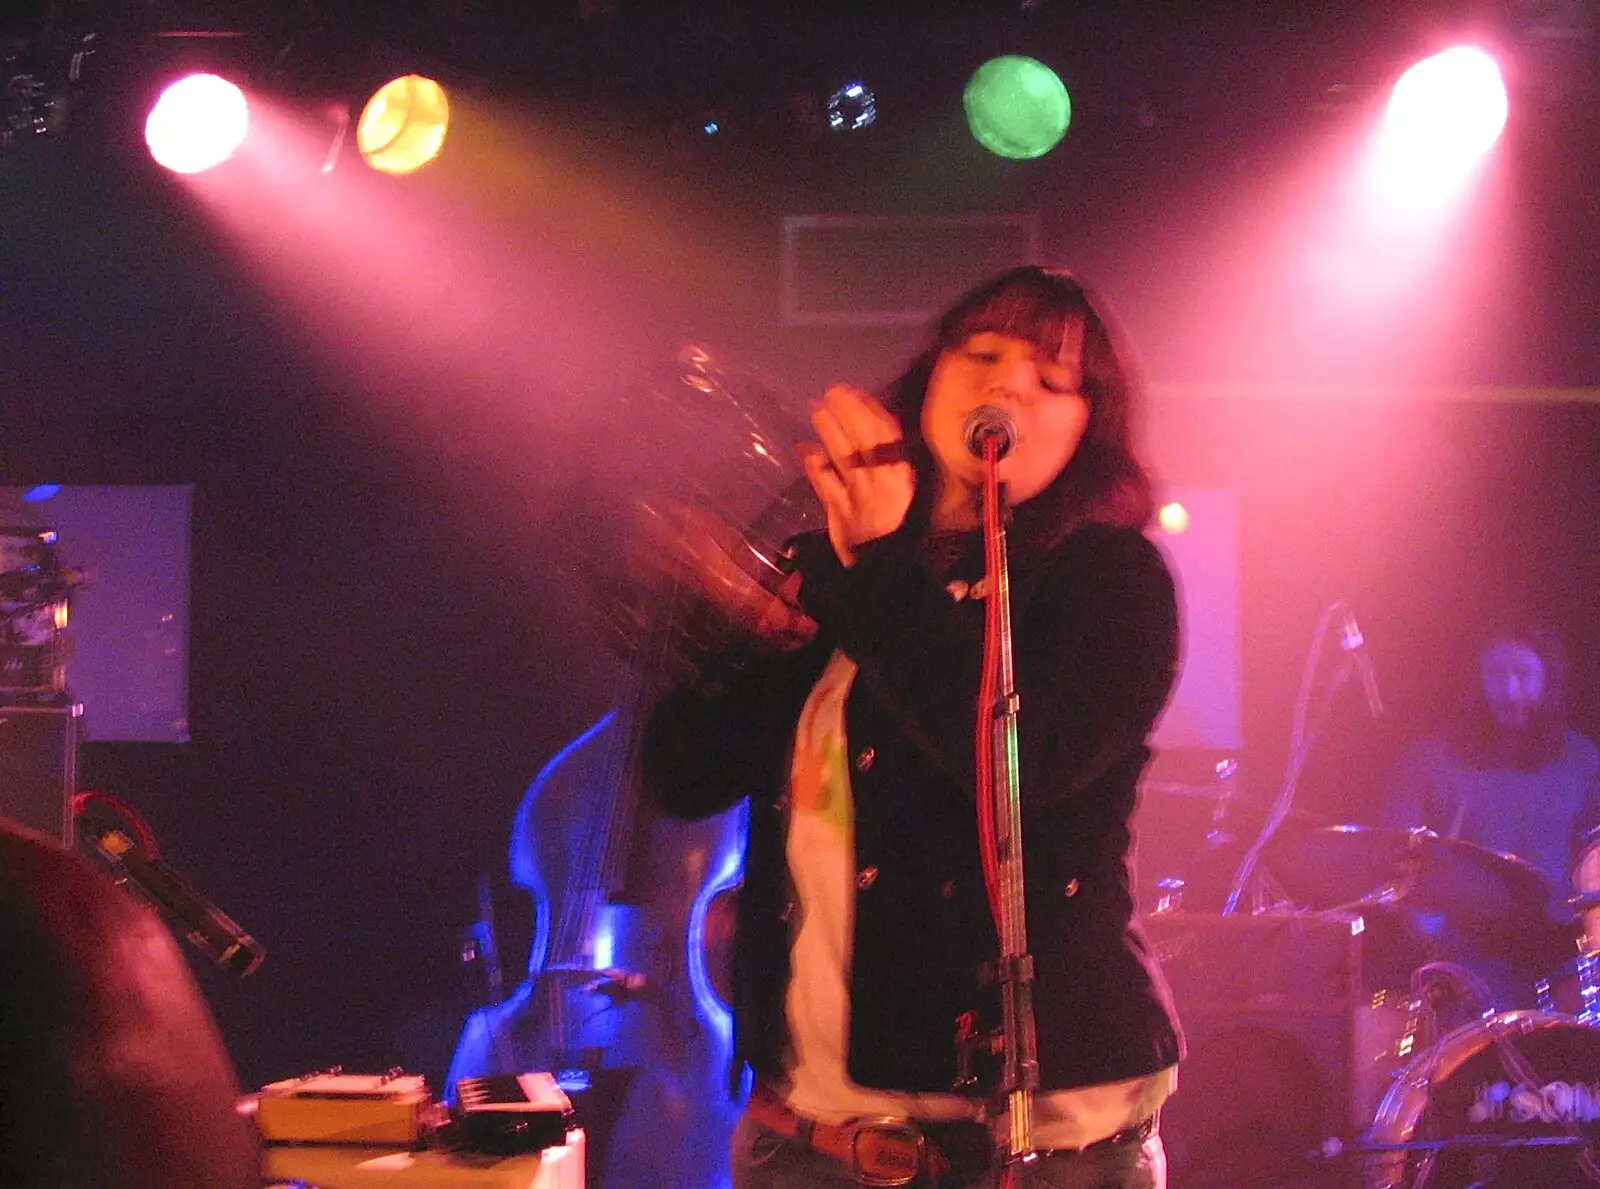 Michele Stodart thrashes a tambourine around, from Embrace and Ed Harcourt Live in Norwich, Norfolk - 17th November 2004